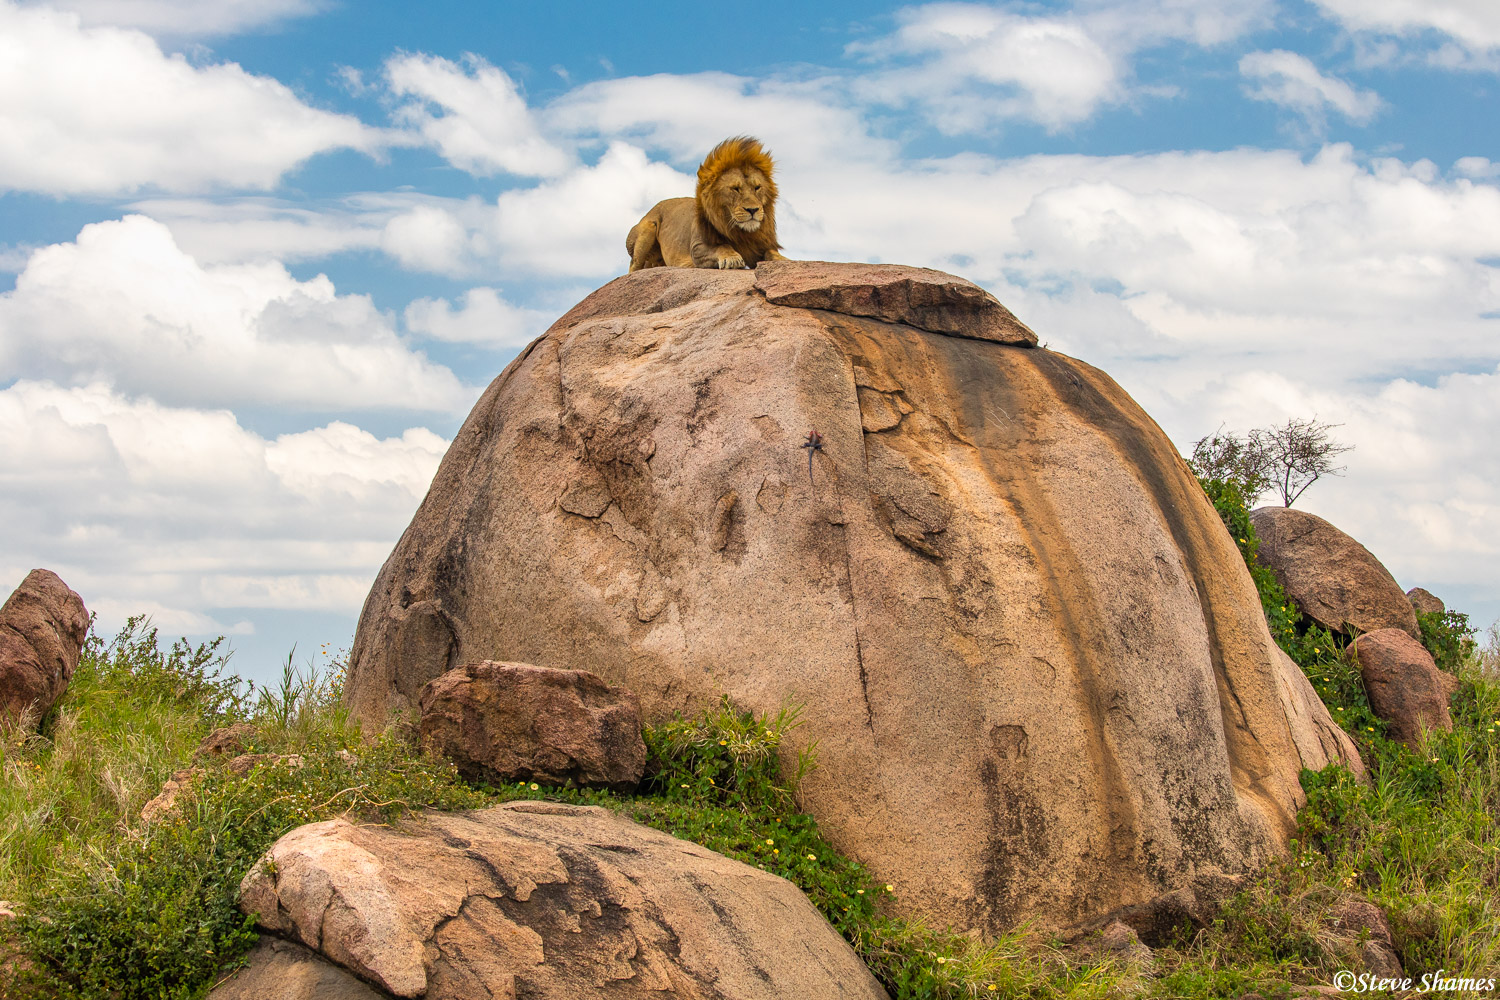 This lion king has a rocky throne.